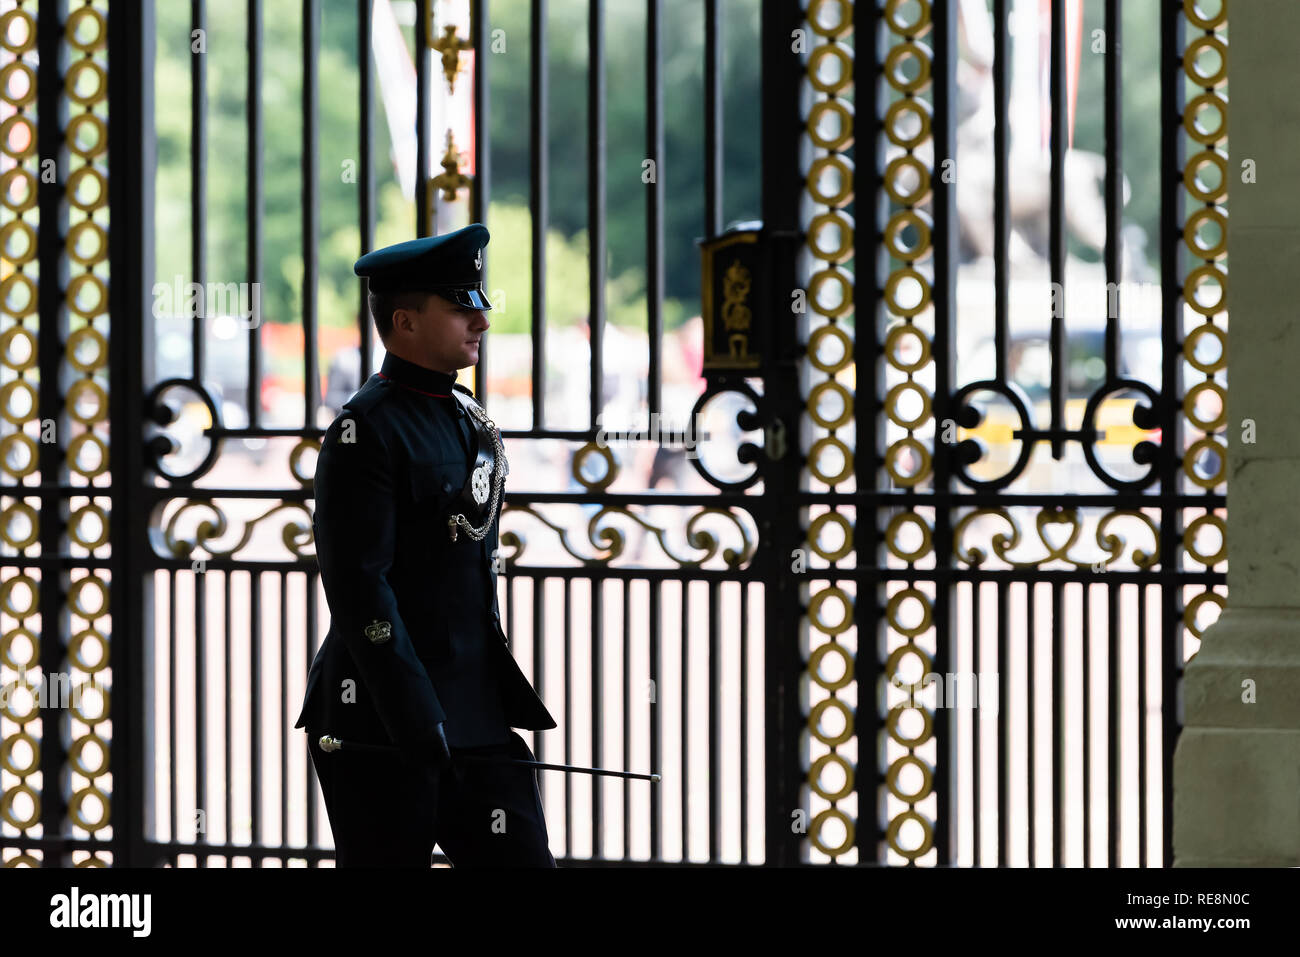 London, UK - June 21, 2018: One English Royal security guard police officer walking marching in front of Buckingham Palace gate fence in Green Park Stock Photo